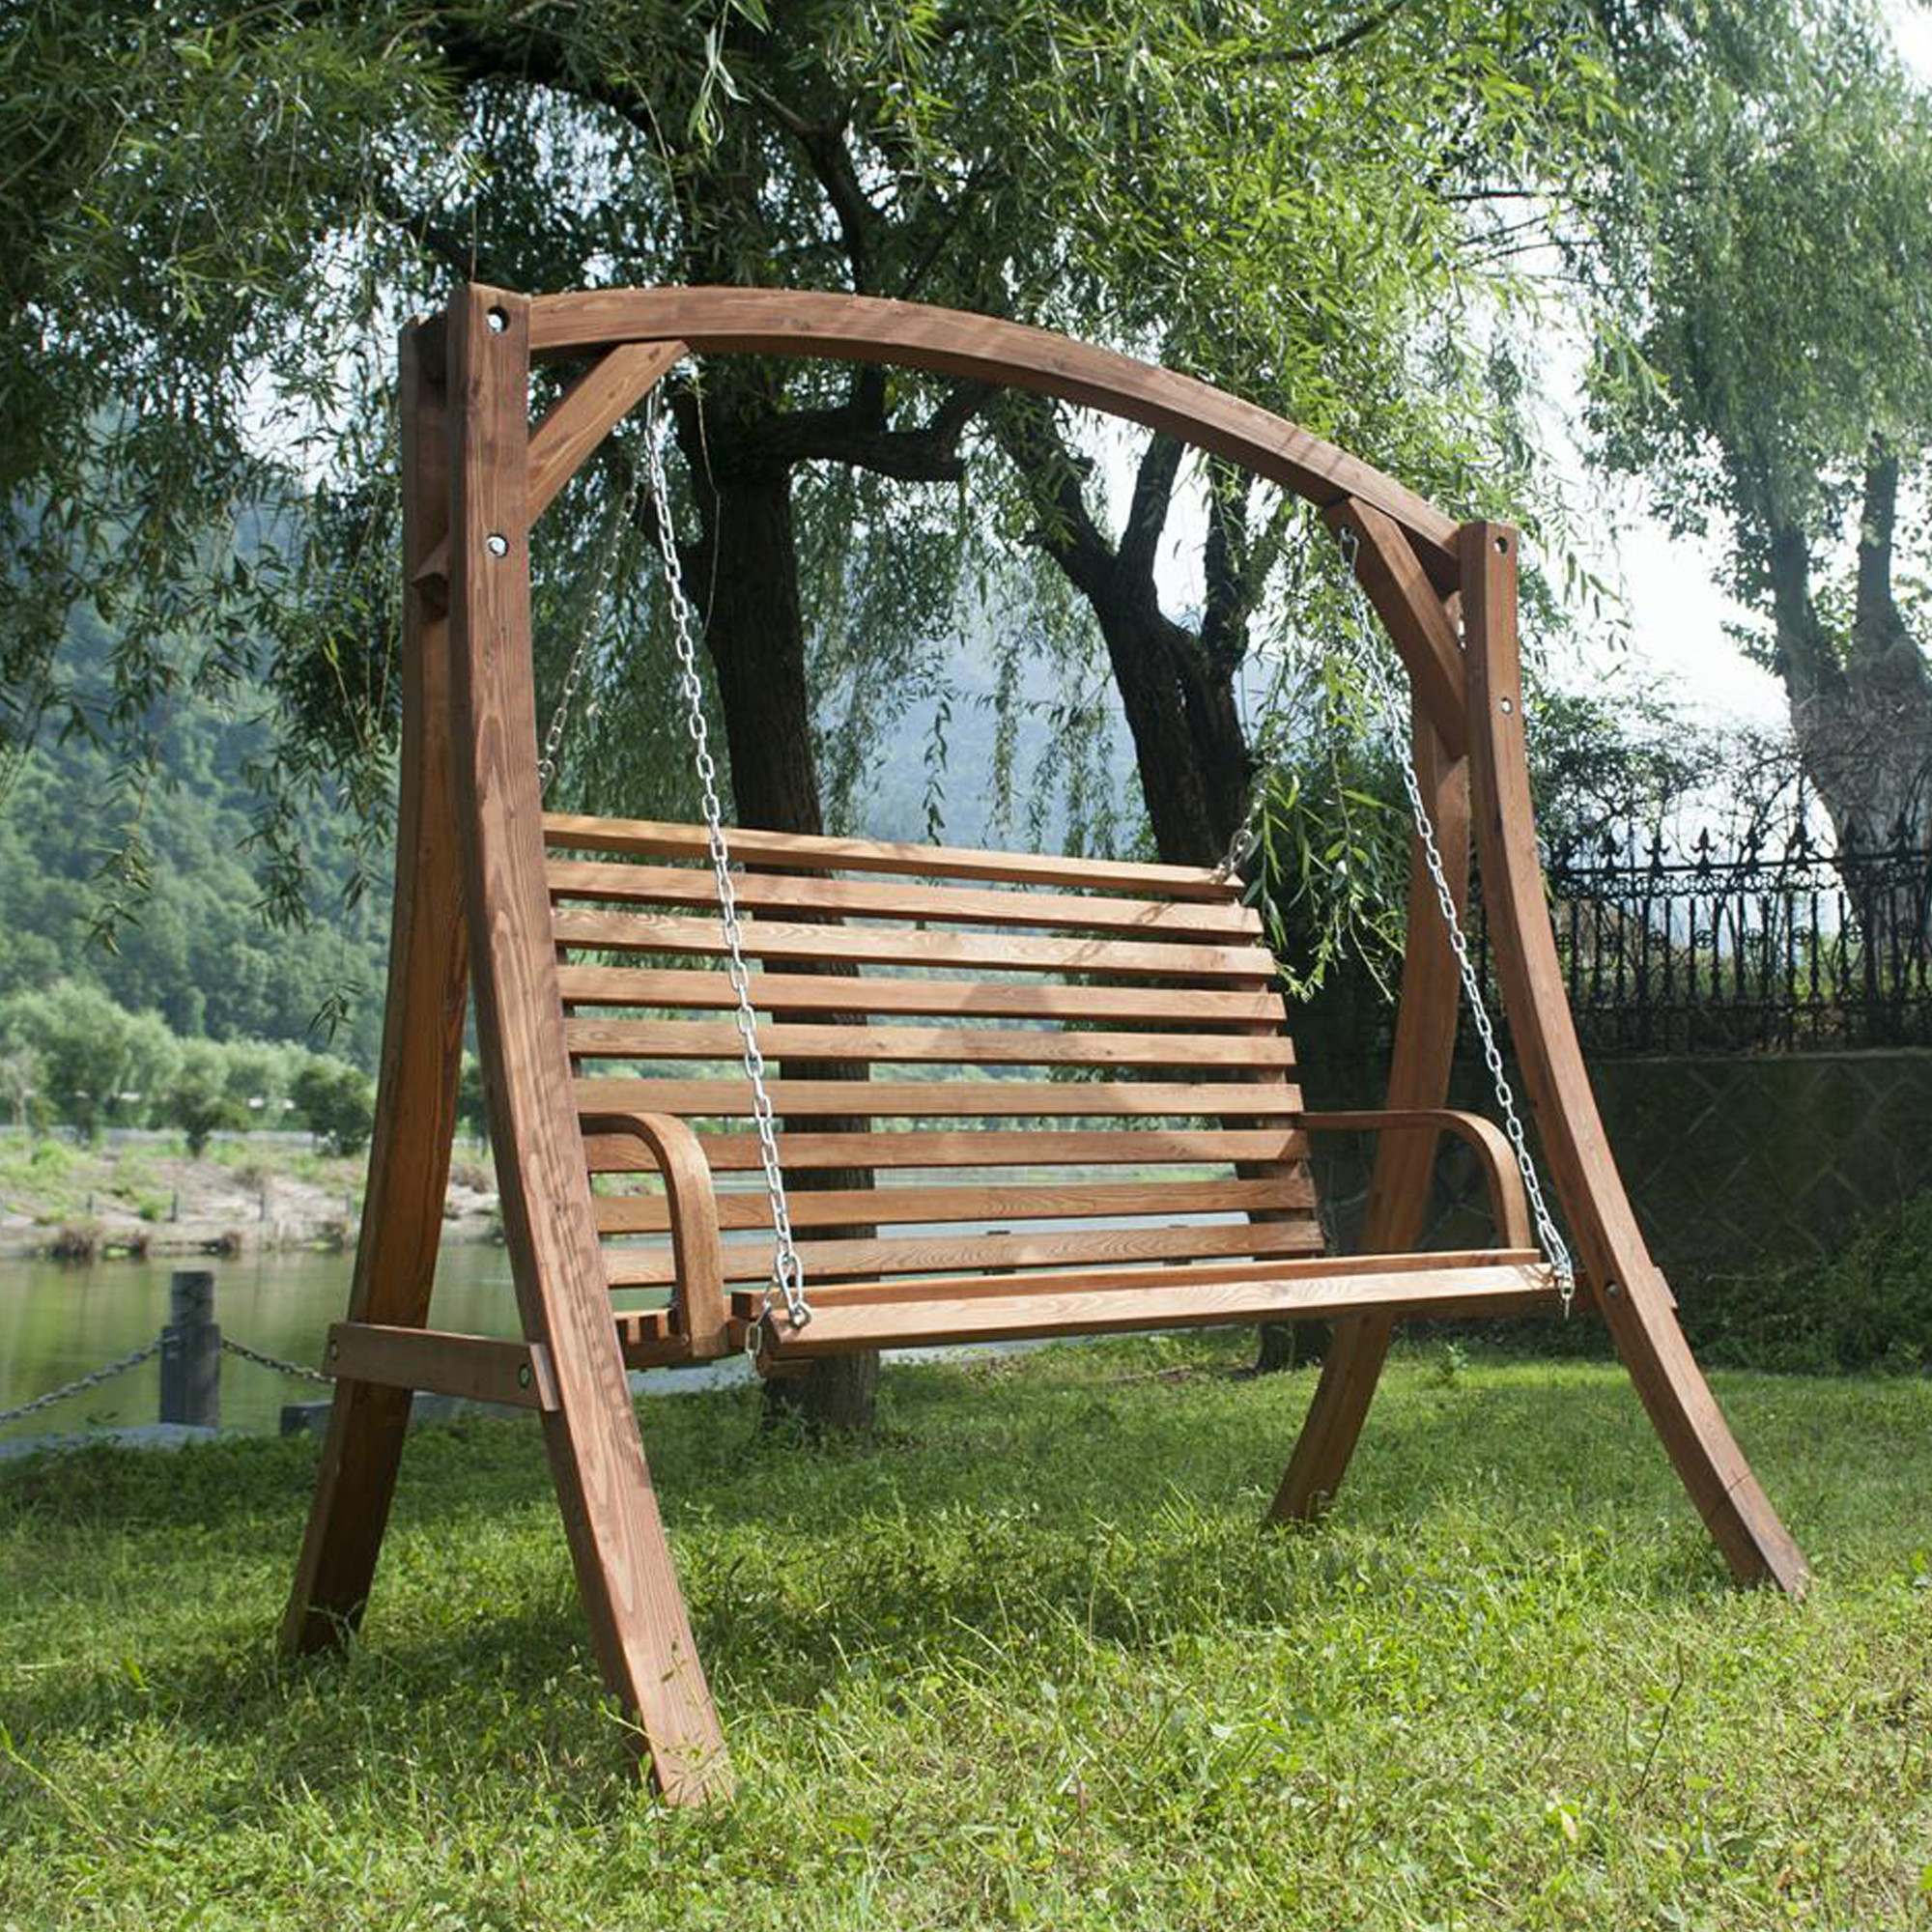 Exterior. Brown Wooden Swing A Frame With Chain And Wooden Seat Plus ...